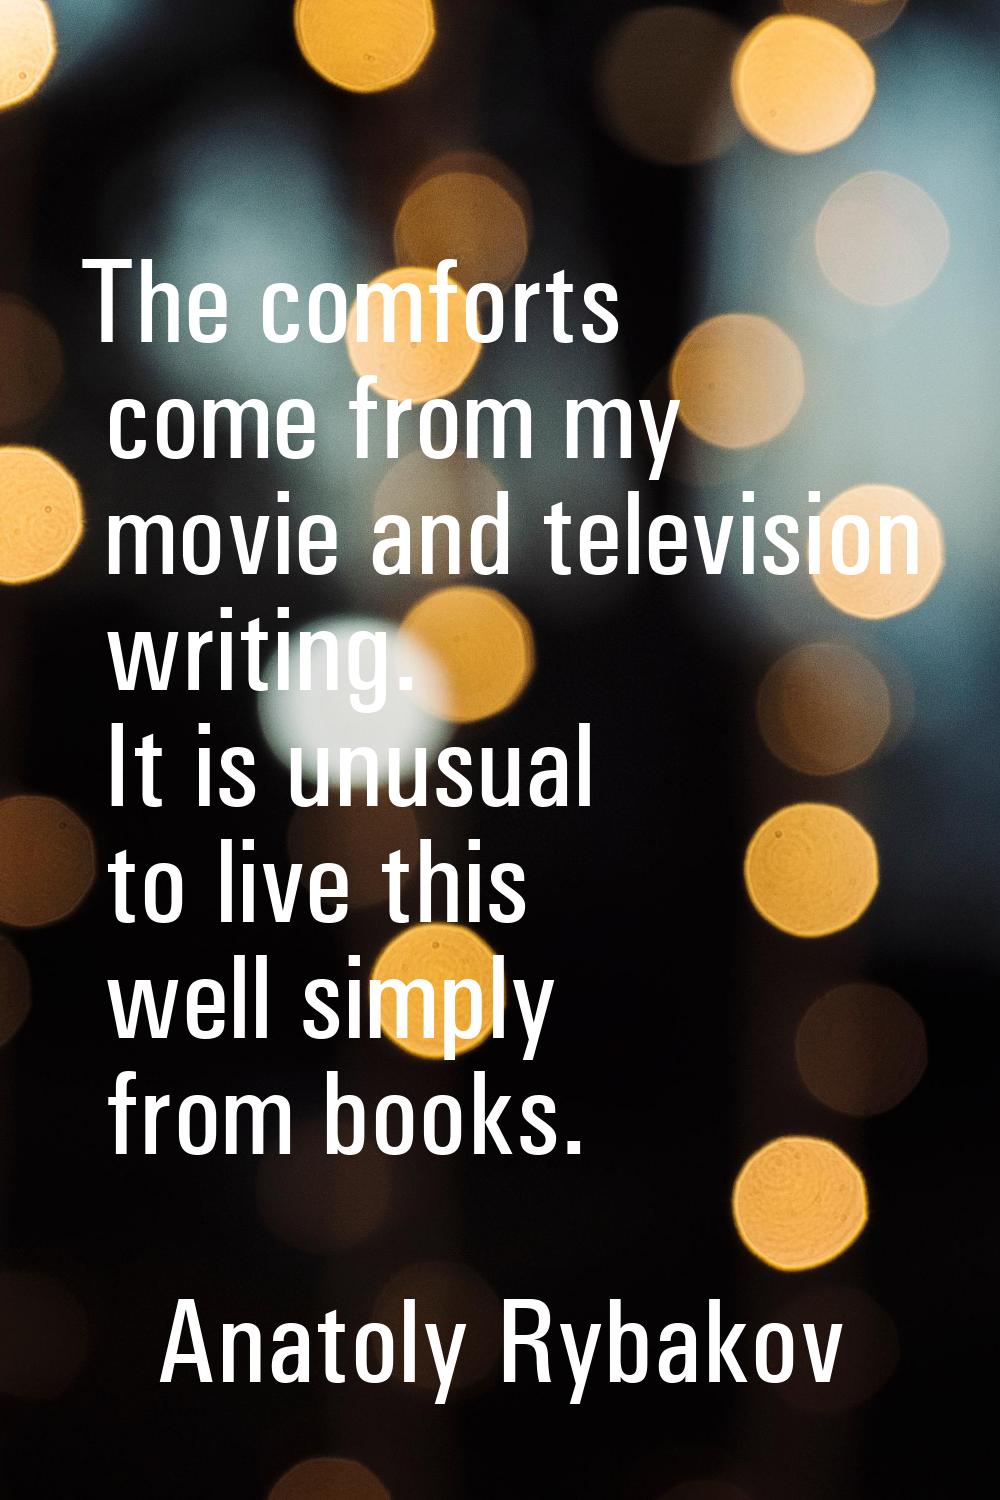 The comforts come from my movie and television writing. It is unusual to live this well simply from